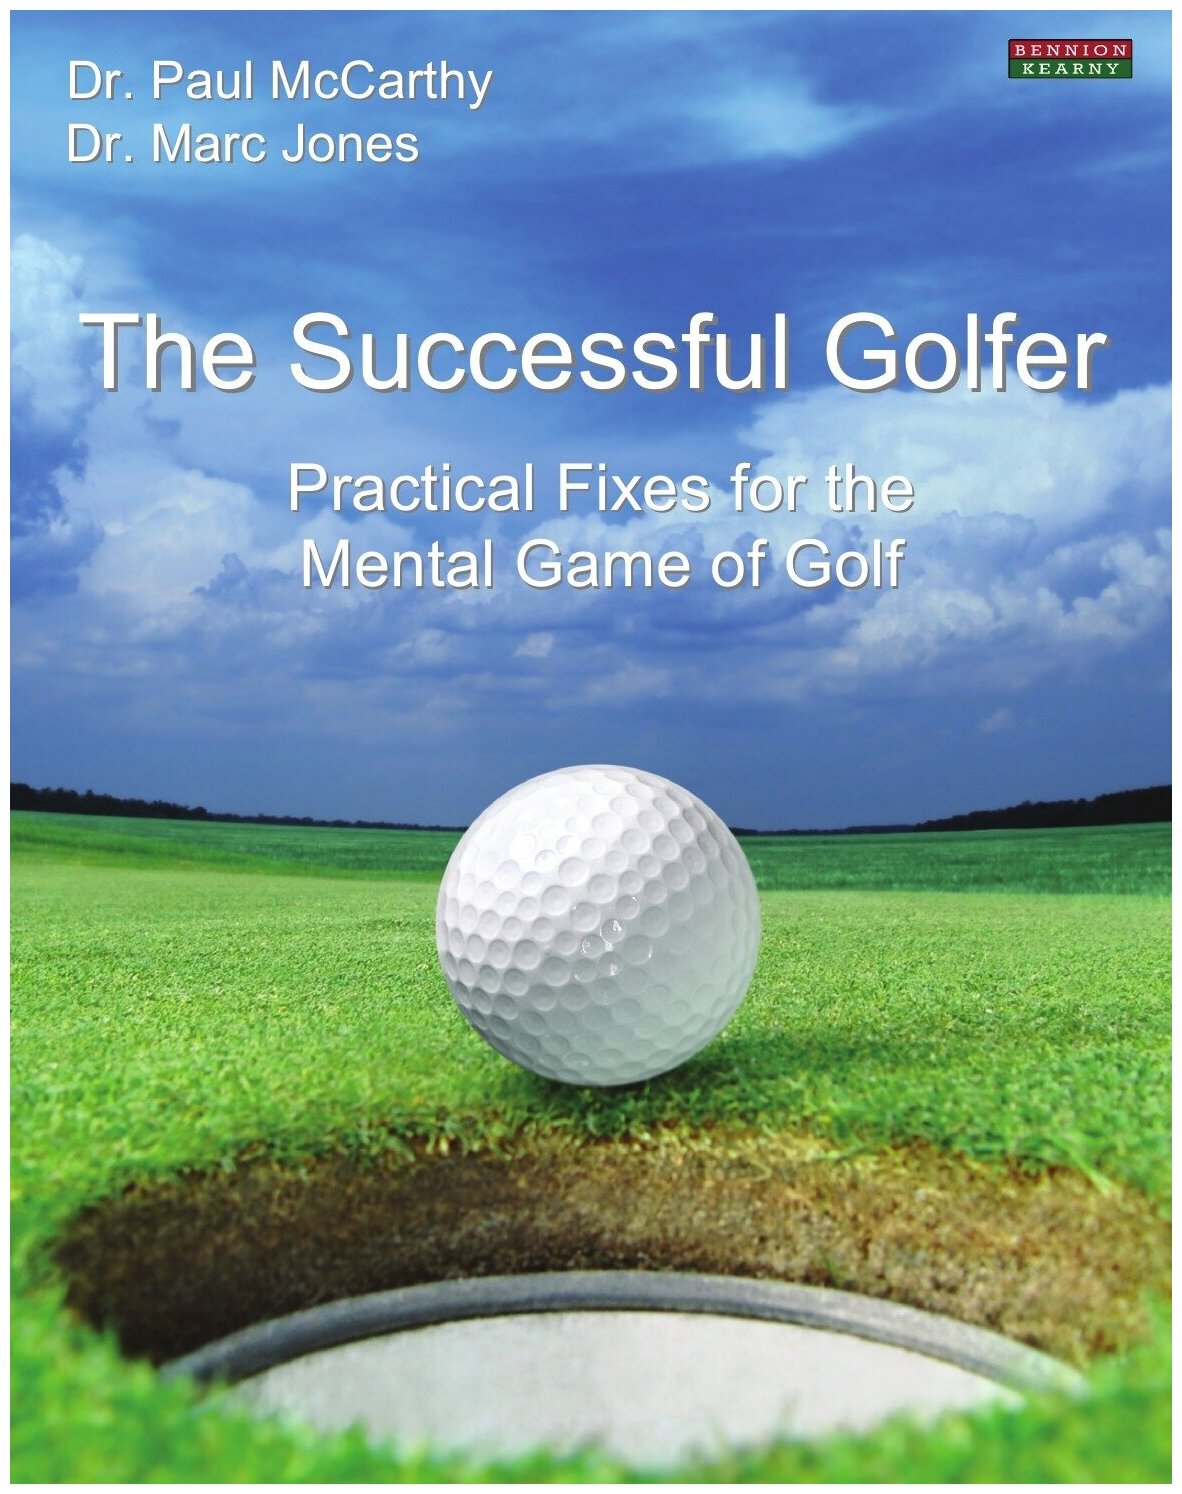 The Successful Golfer. Practical Fixes for the Mental Game of Golf